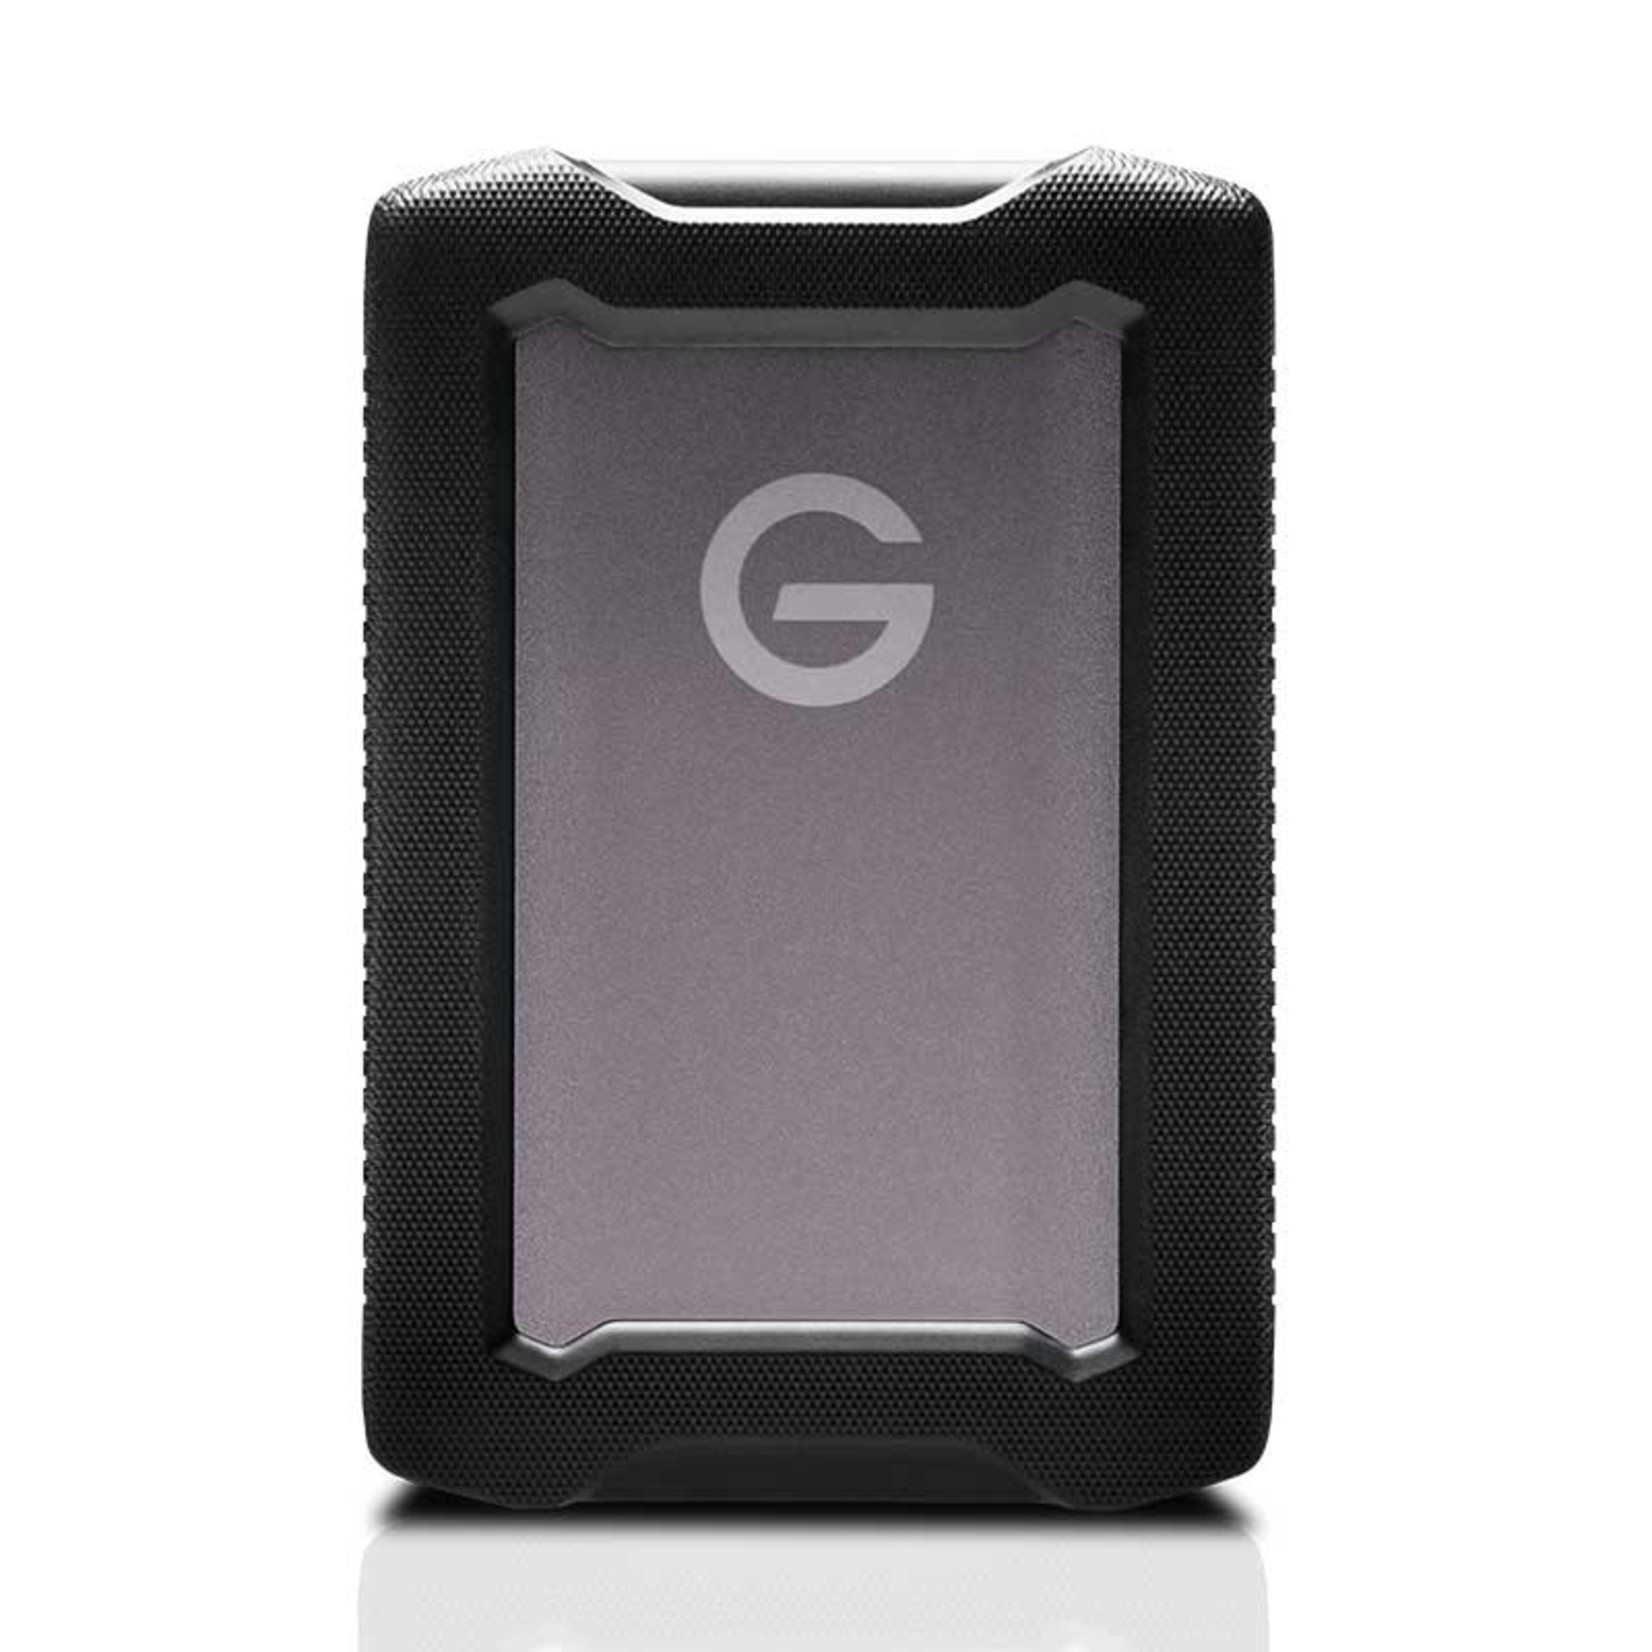 SANDISK PROFESSIONAL, G-DRIVE ARMORATD, SPACE GREY, 4TB, ALL-TERRAIN RUGGED  Pro Photo